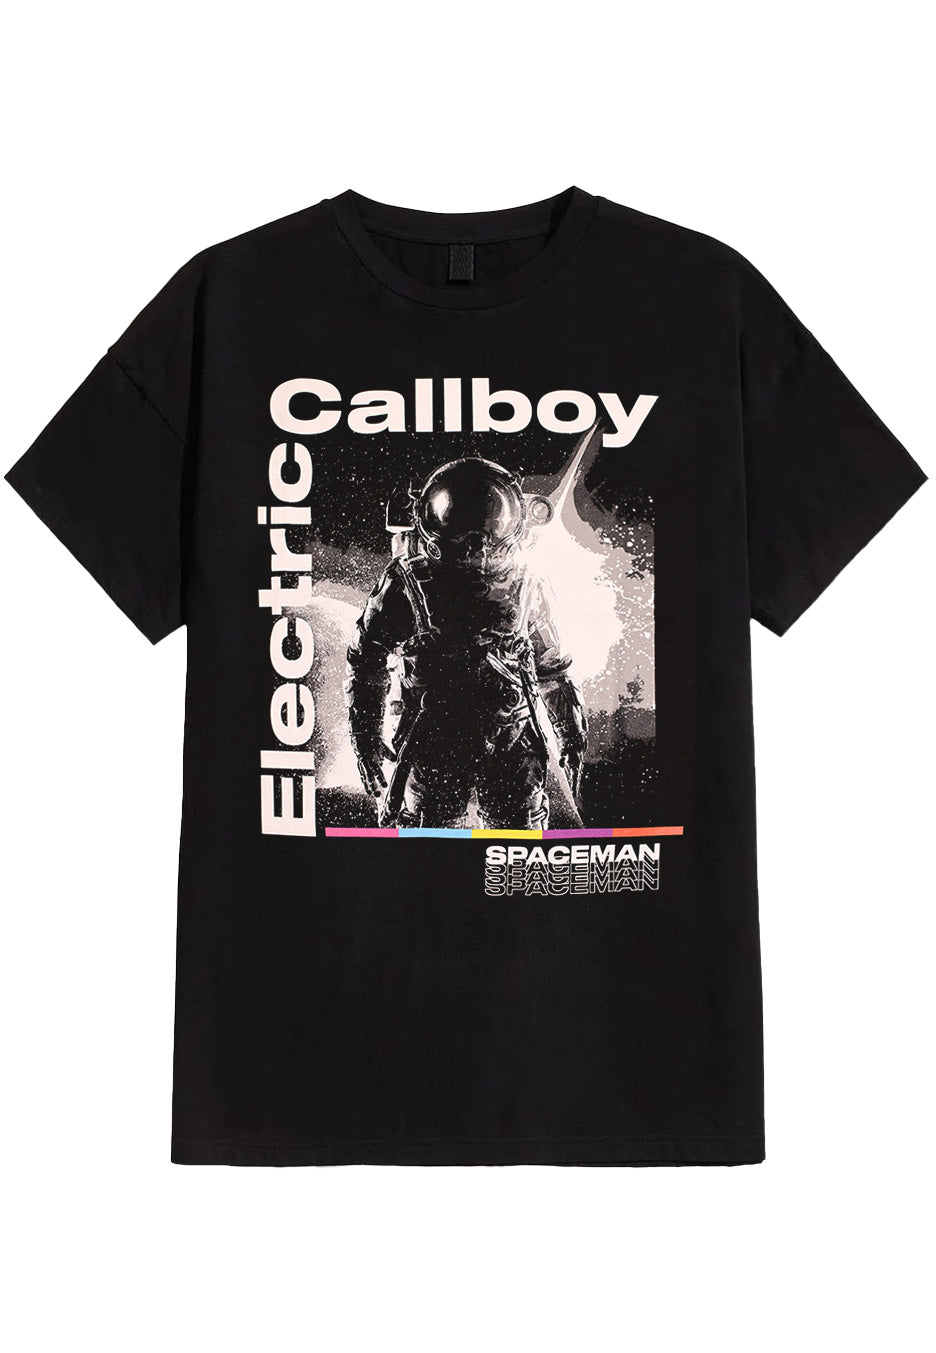 Electric Callboy - Spacemen Cover - T-Shirt